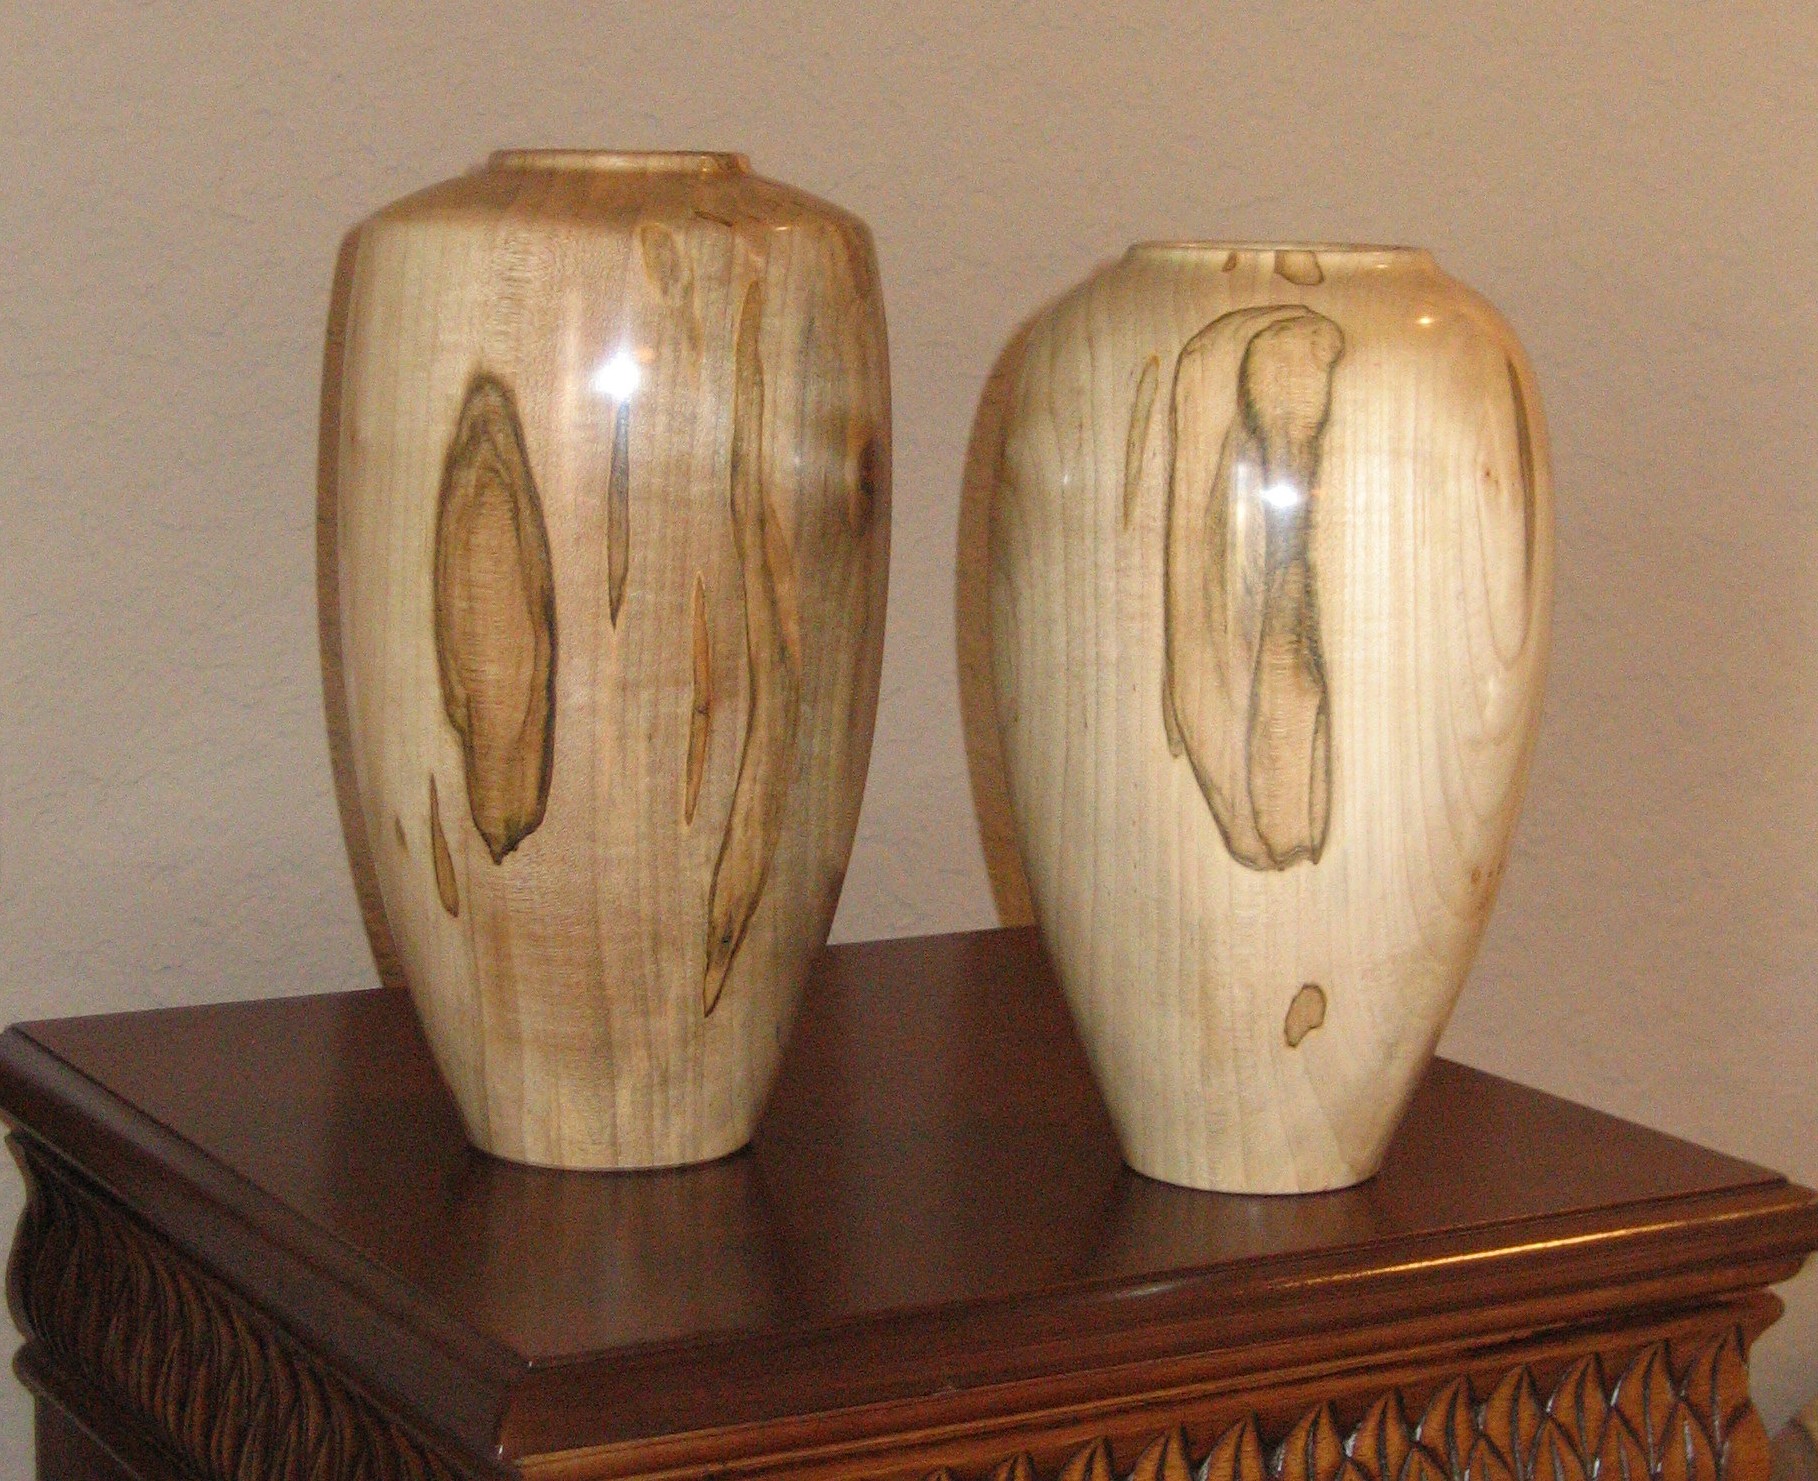 "His and Hers" vases